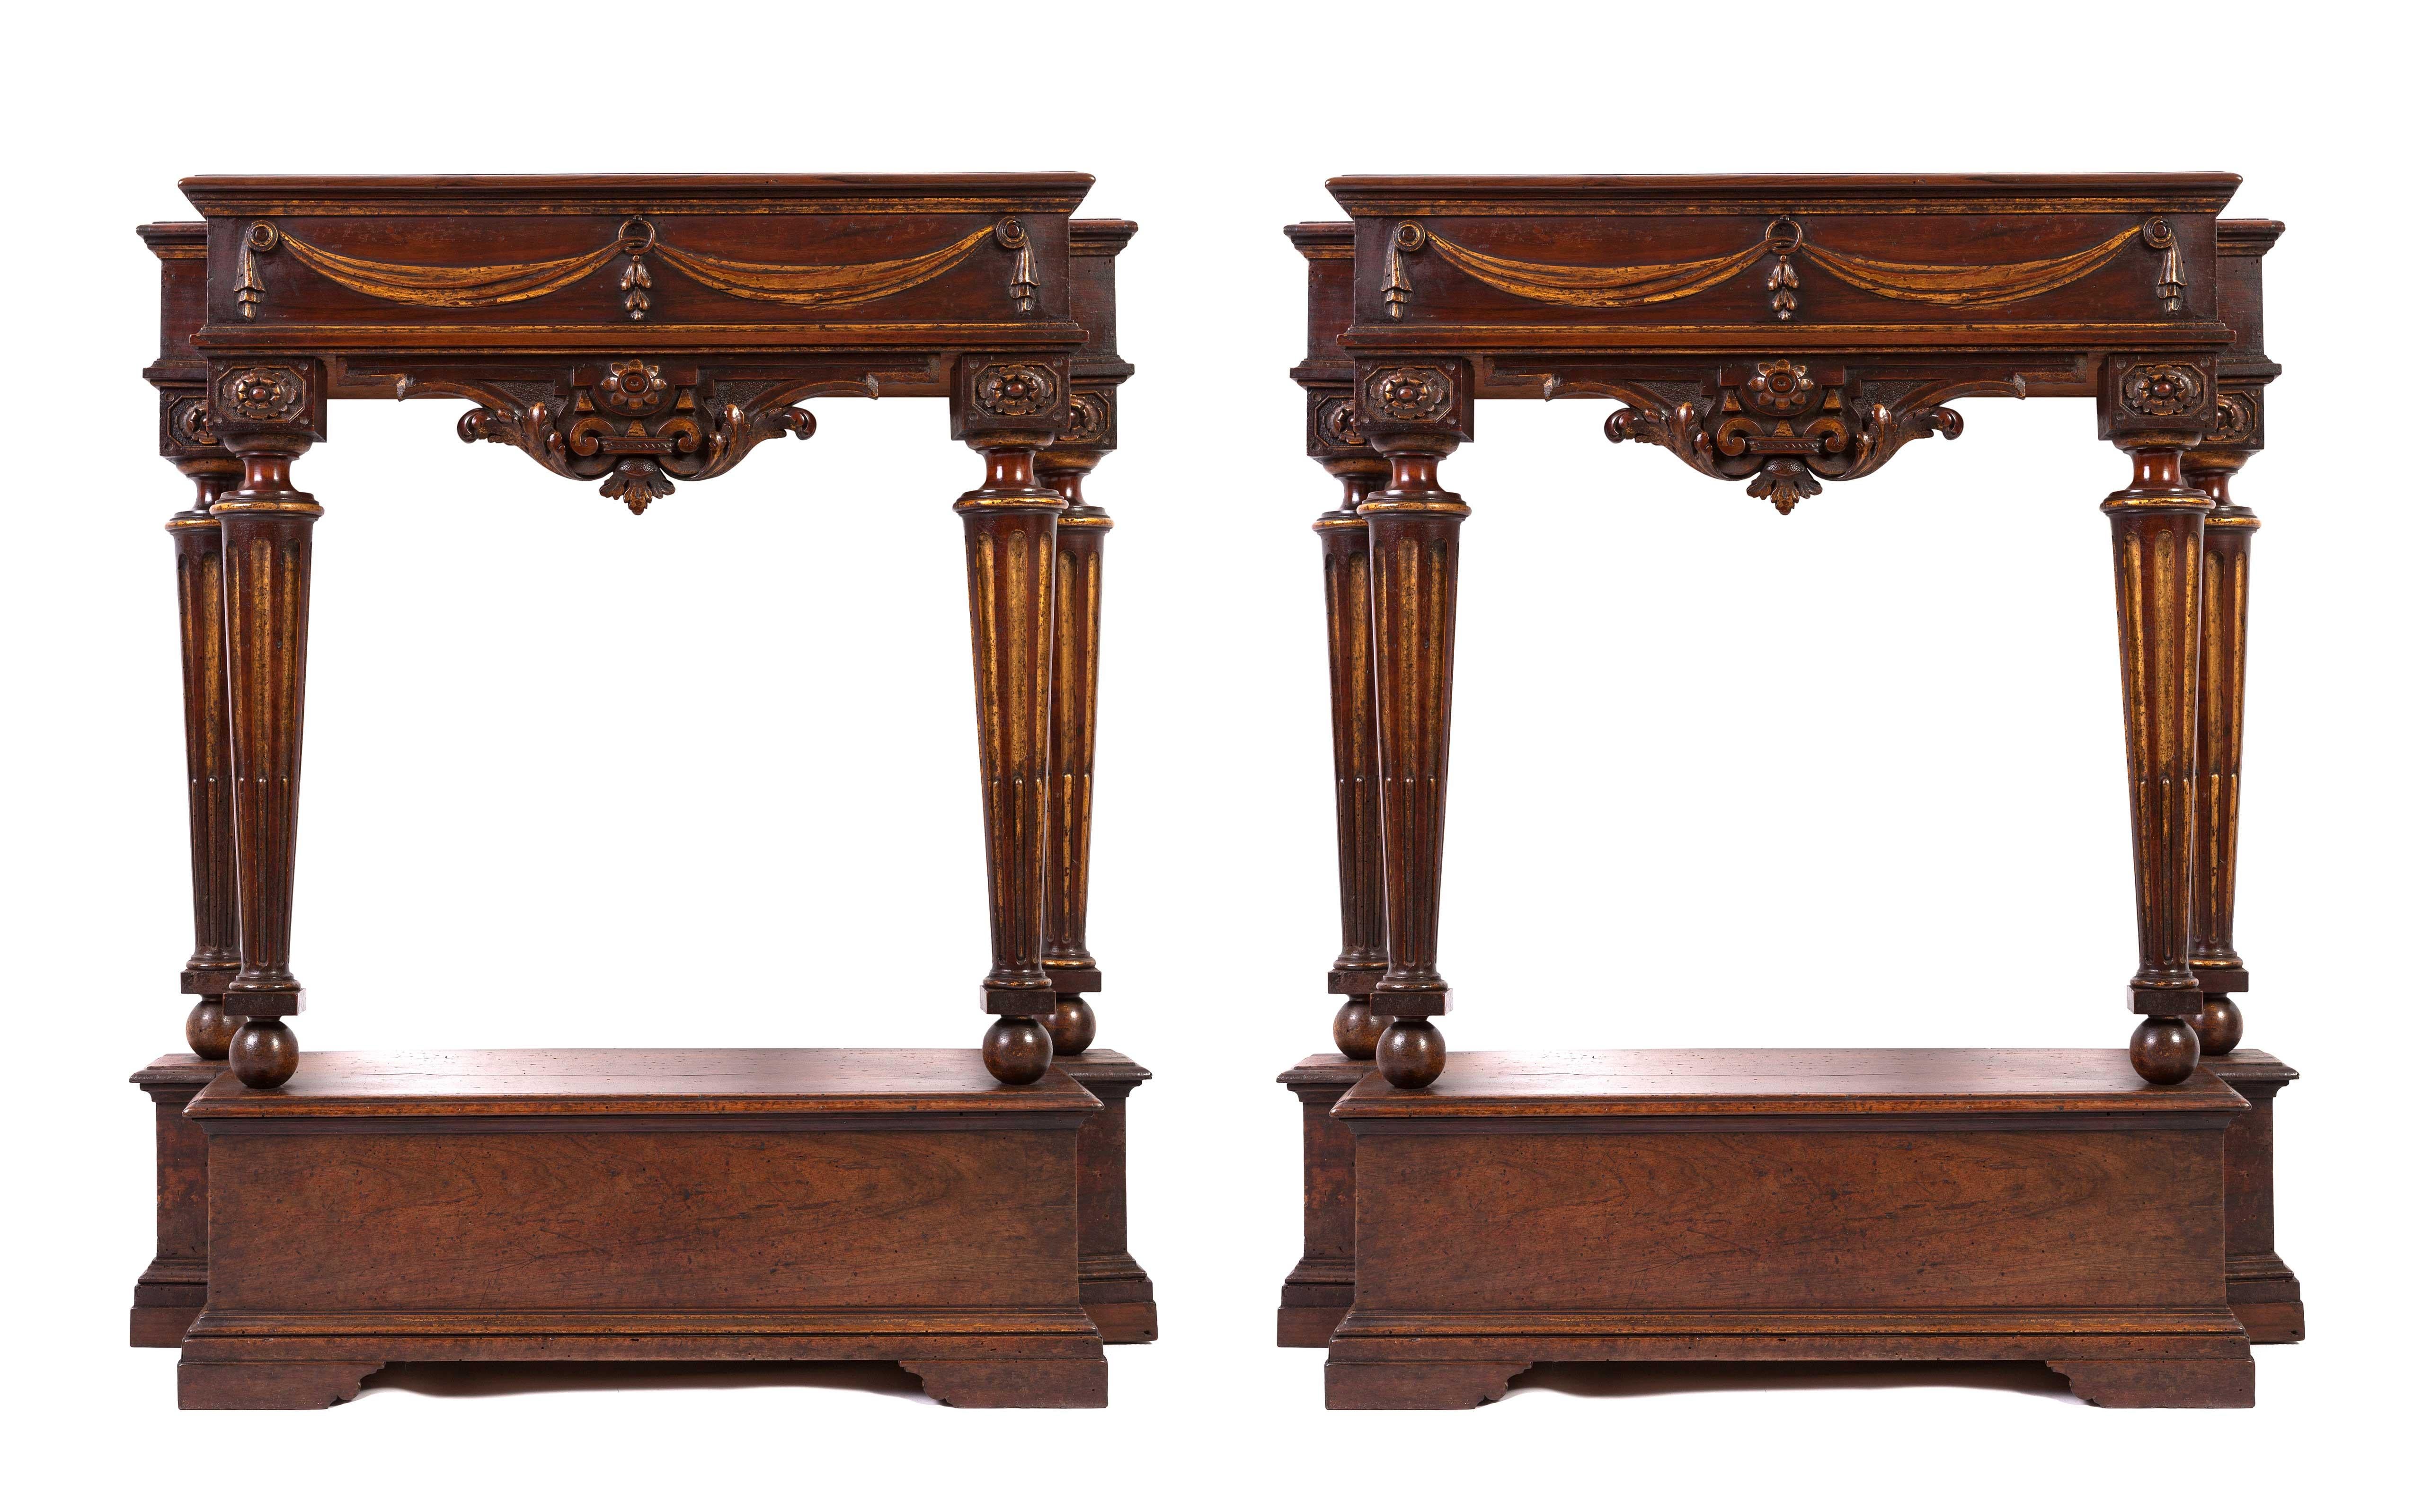 Renaissance Revival  Console Tables with Matching Mirrors, Italian circa 1750 (Pair) For Sale